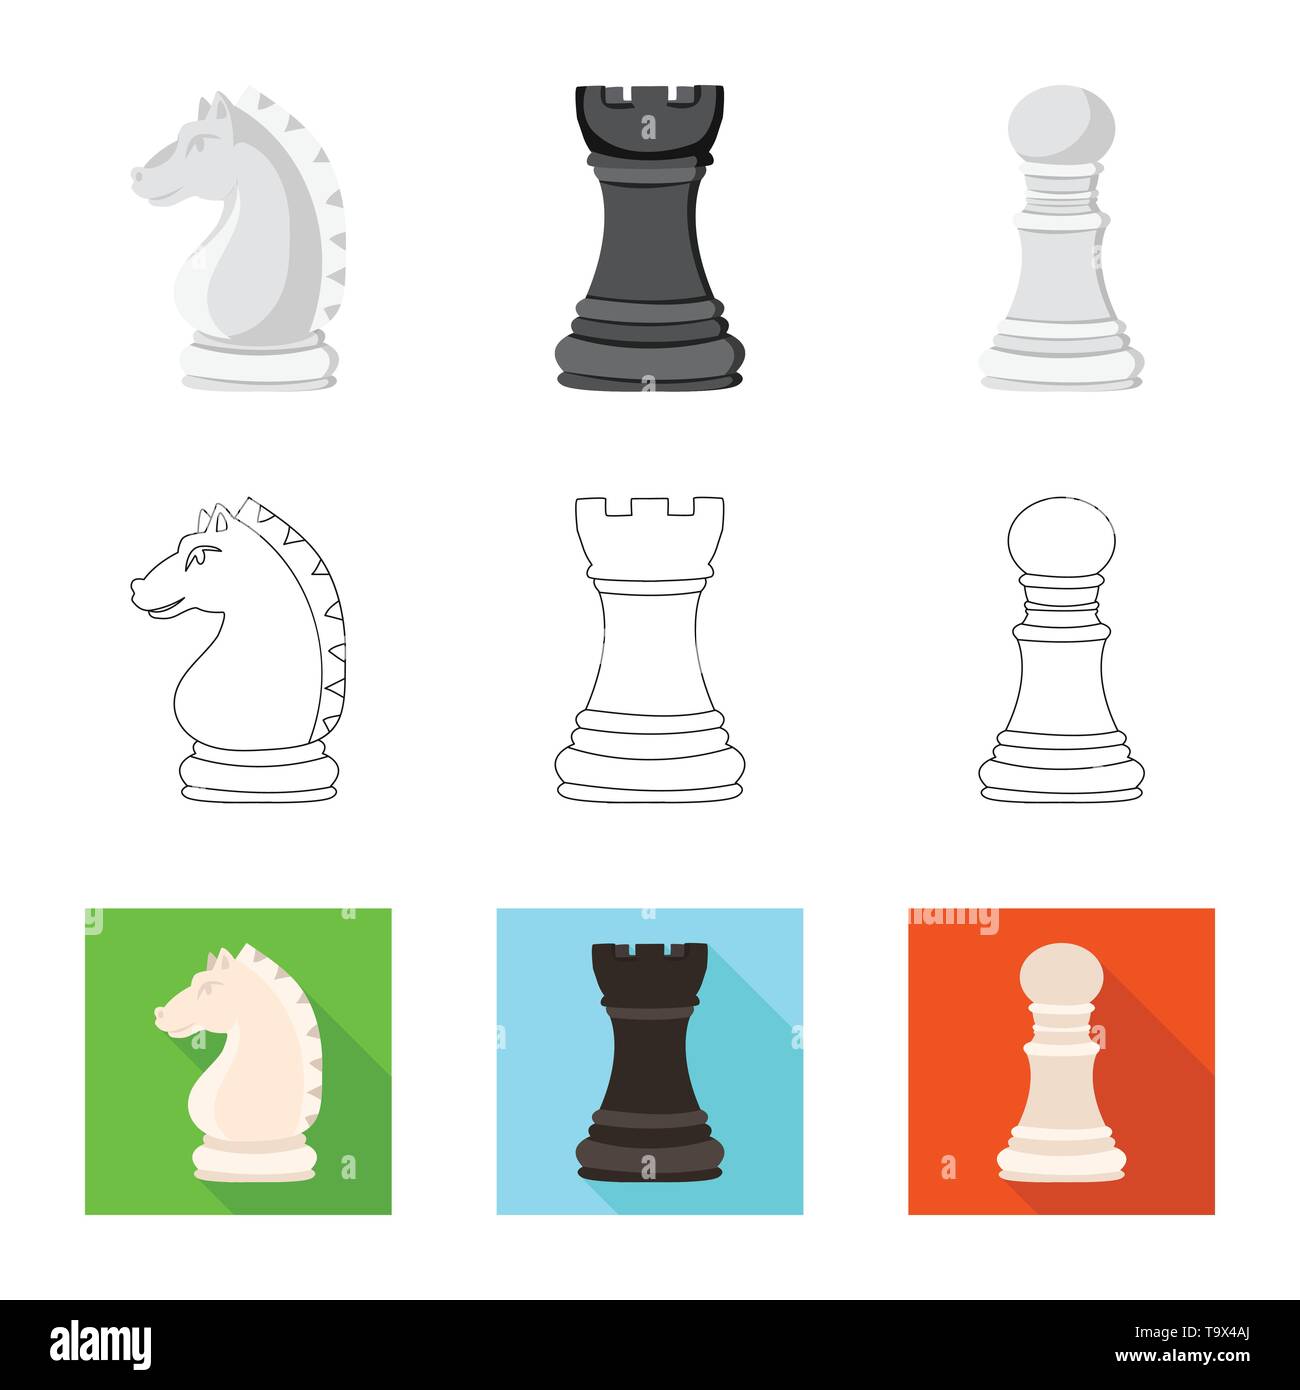 knight,rook,pawn,horse,black,board,castle,white,tower,figure,head,network,counter,change,tournament,goal,leadership,sculpture,action,achieve,statue,sport,fight,stallion,success,match,checkmate,thin,club,target,chess,game,piece,strategy,tactical,play,set,vector,icon,illustration,isolated,collection,design,element,graphic,sign Vector Vectors , Stock Vector